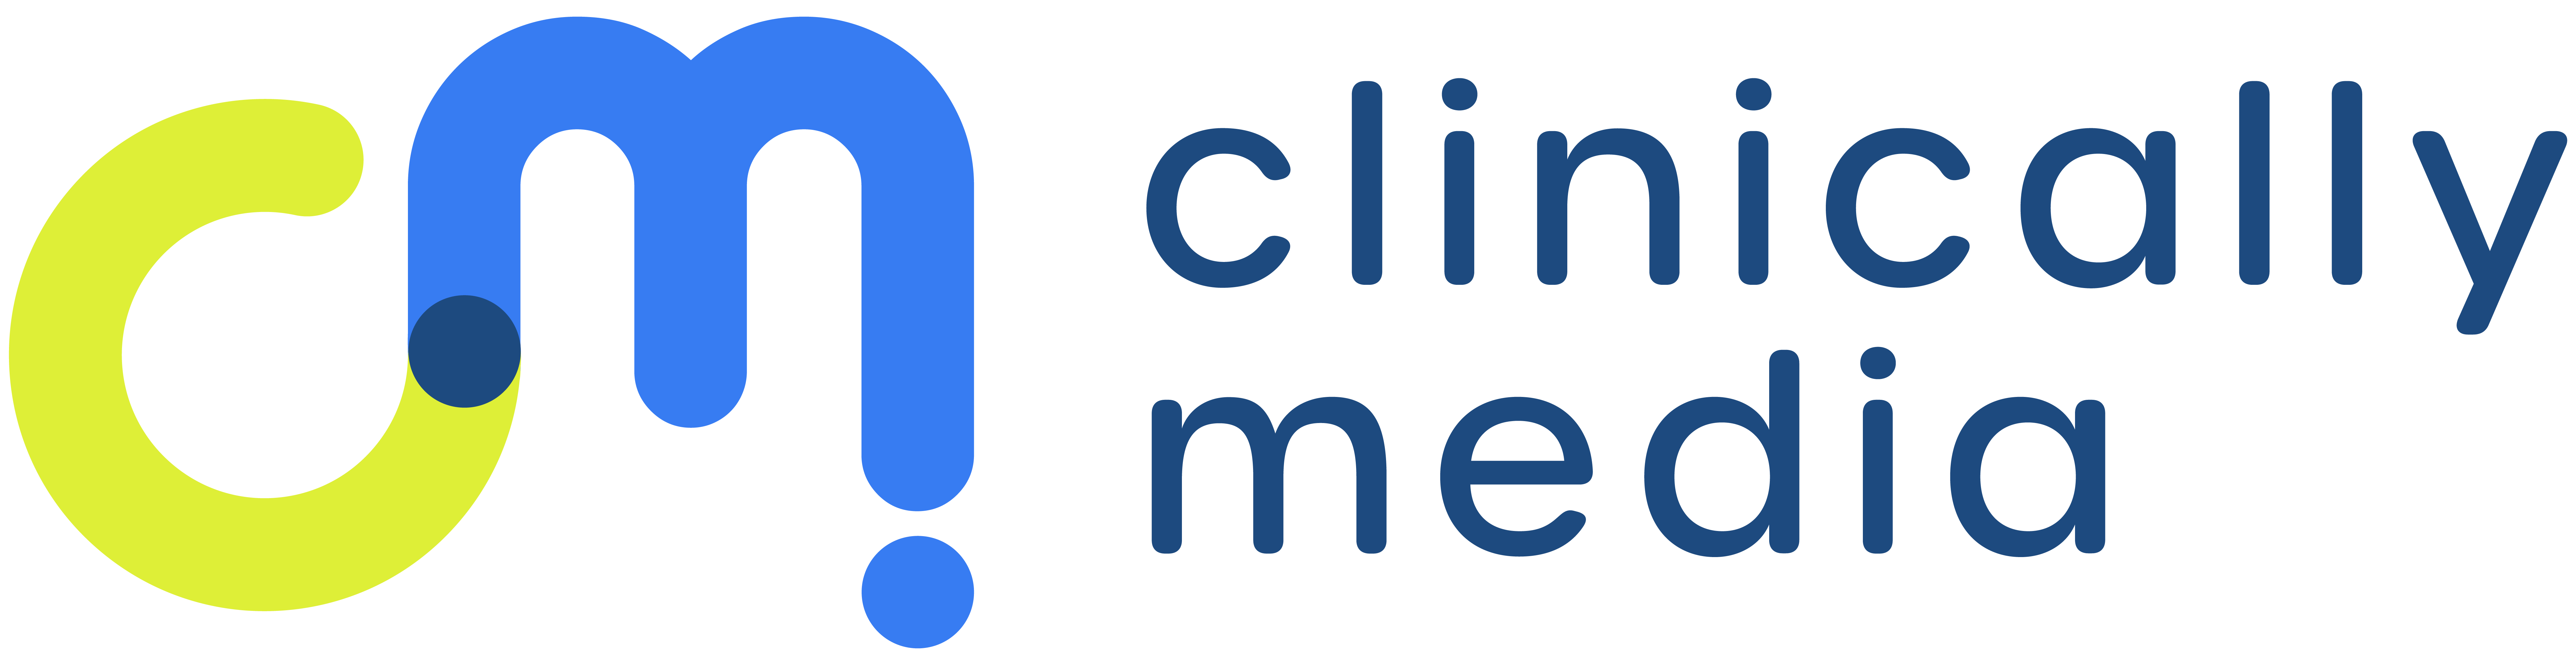 Clinically Media - Patient Recruitment for Clinical Trials